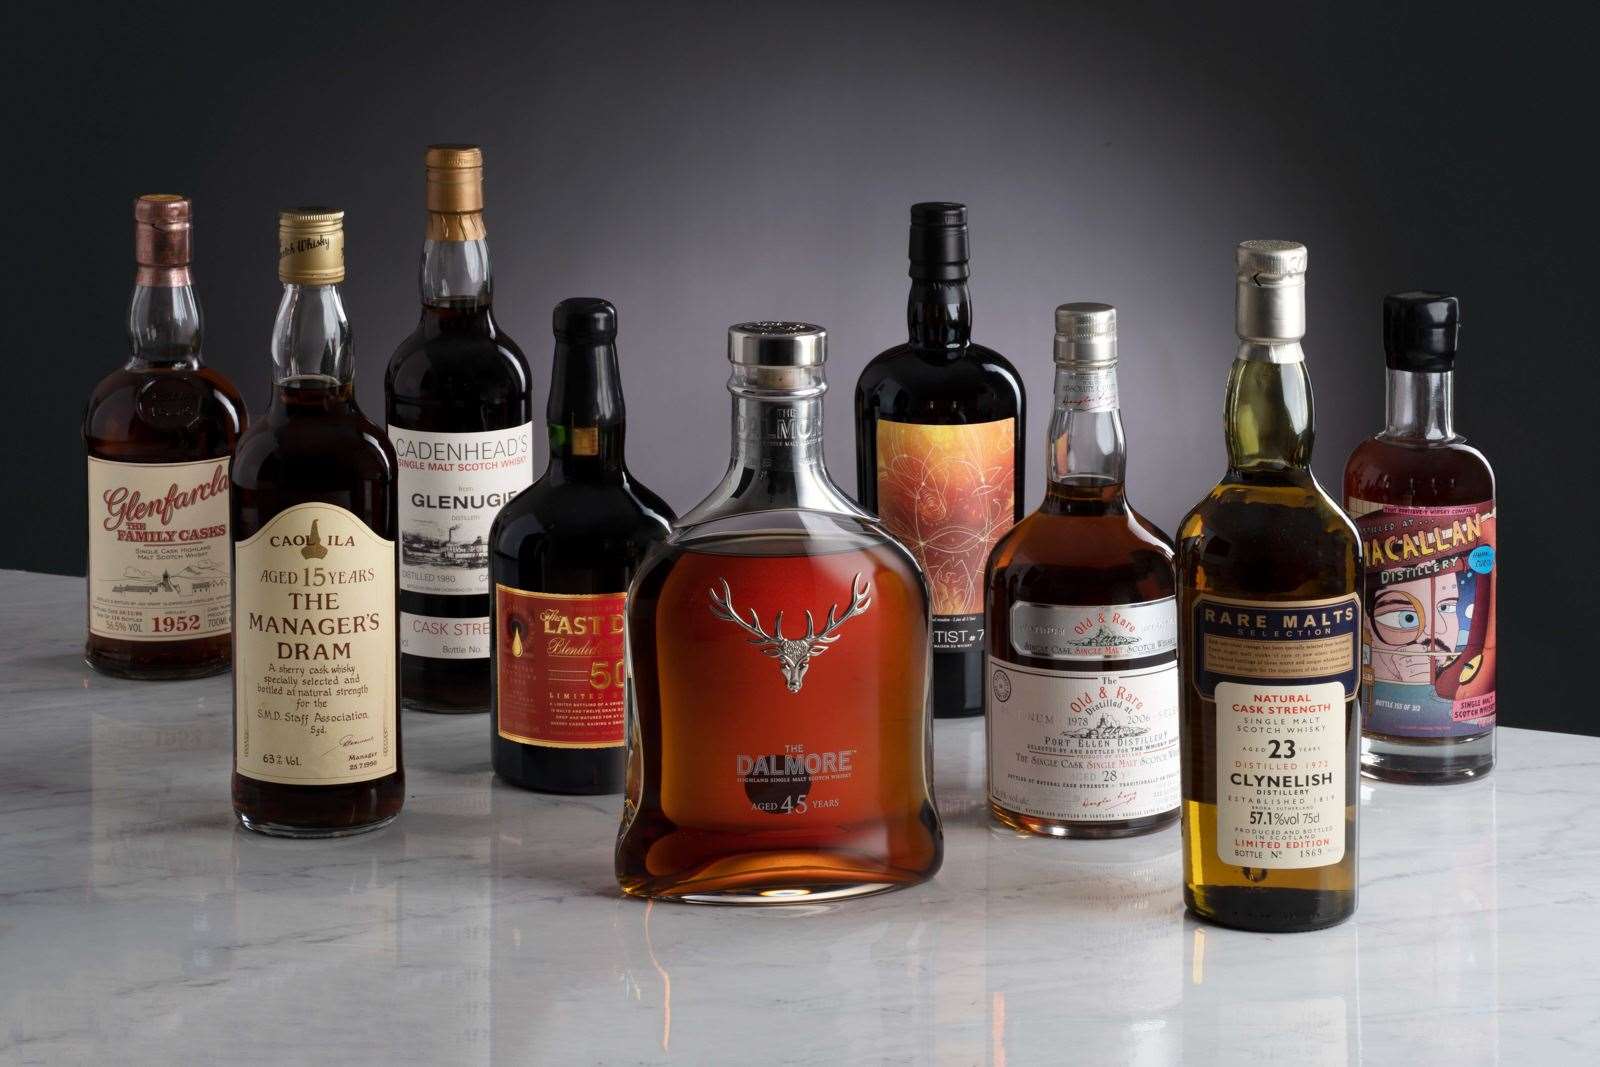 A sought-after Dalmore was amongst the treasures sold off.